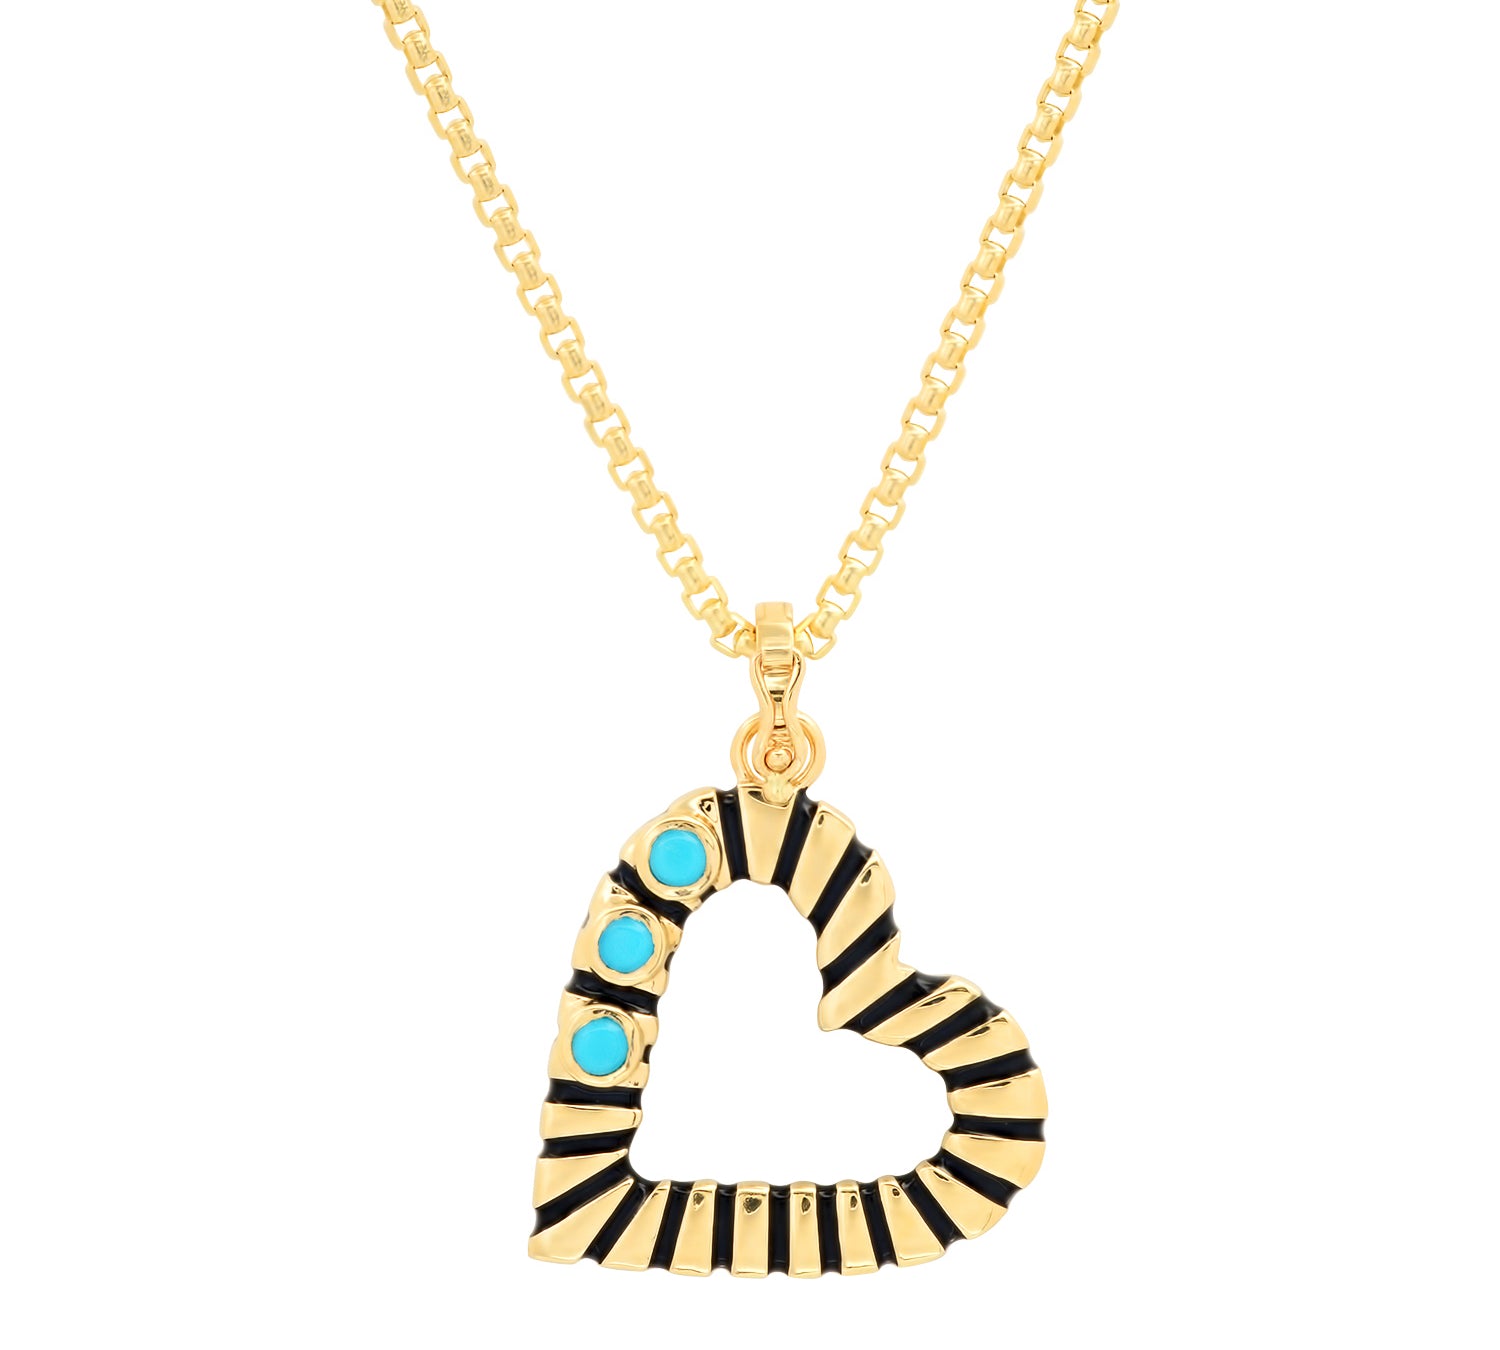 Gold Heart with Turquoise Pendant Helena Rose Jewelry 16 Inch Chain  